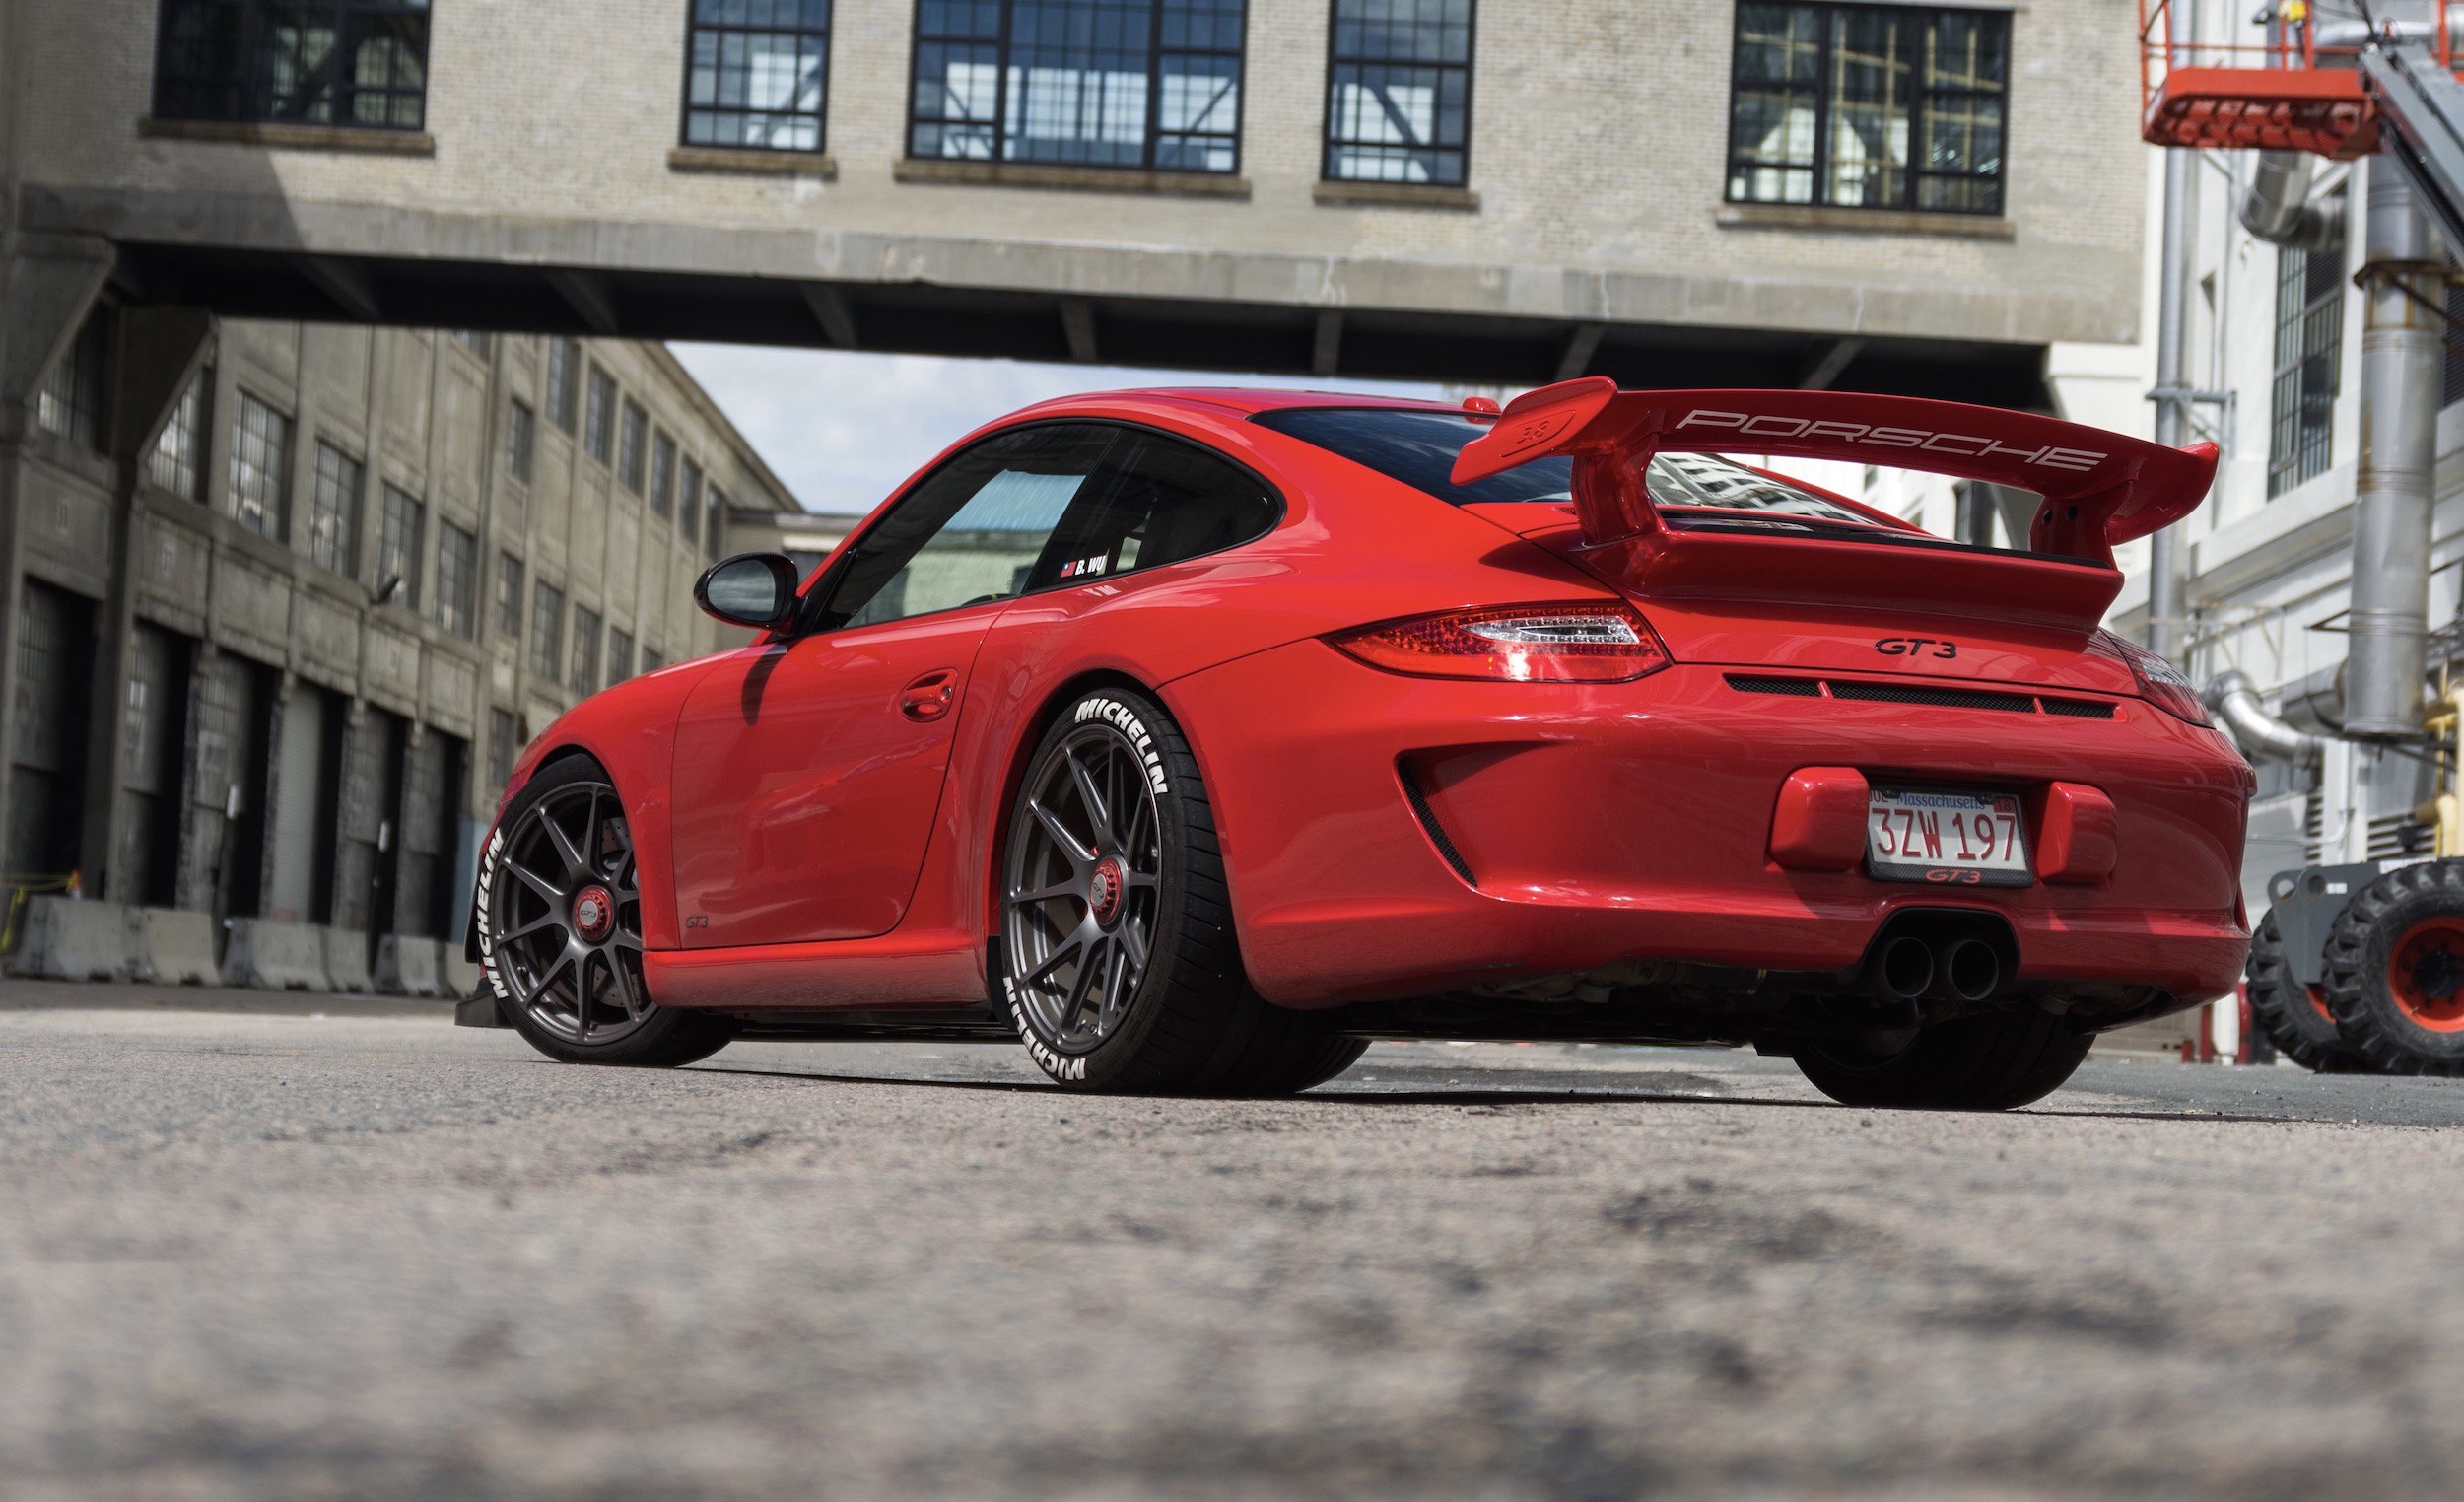 Large Wing Spoiler on Red Porsche 911 GT3 - Photo by Forgeline Motorsports